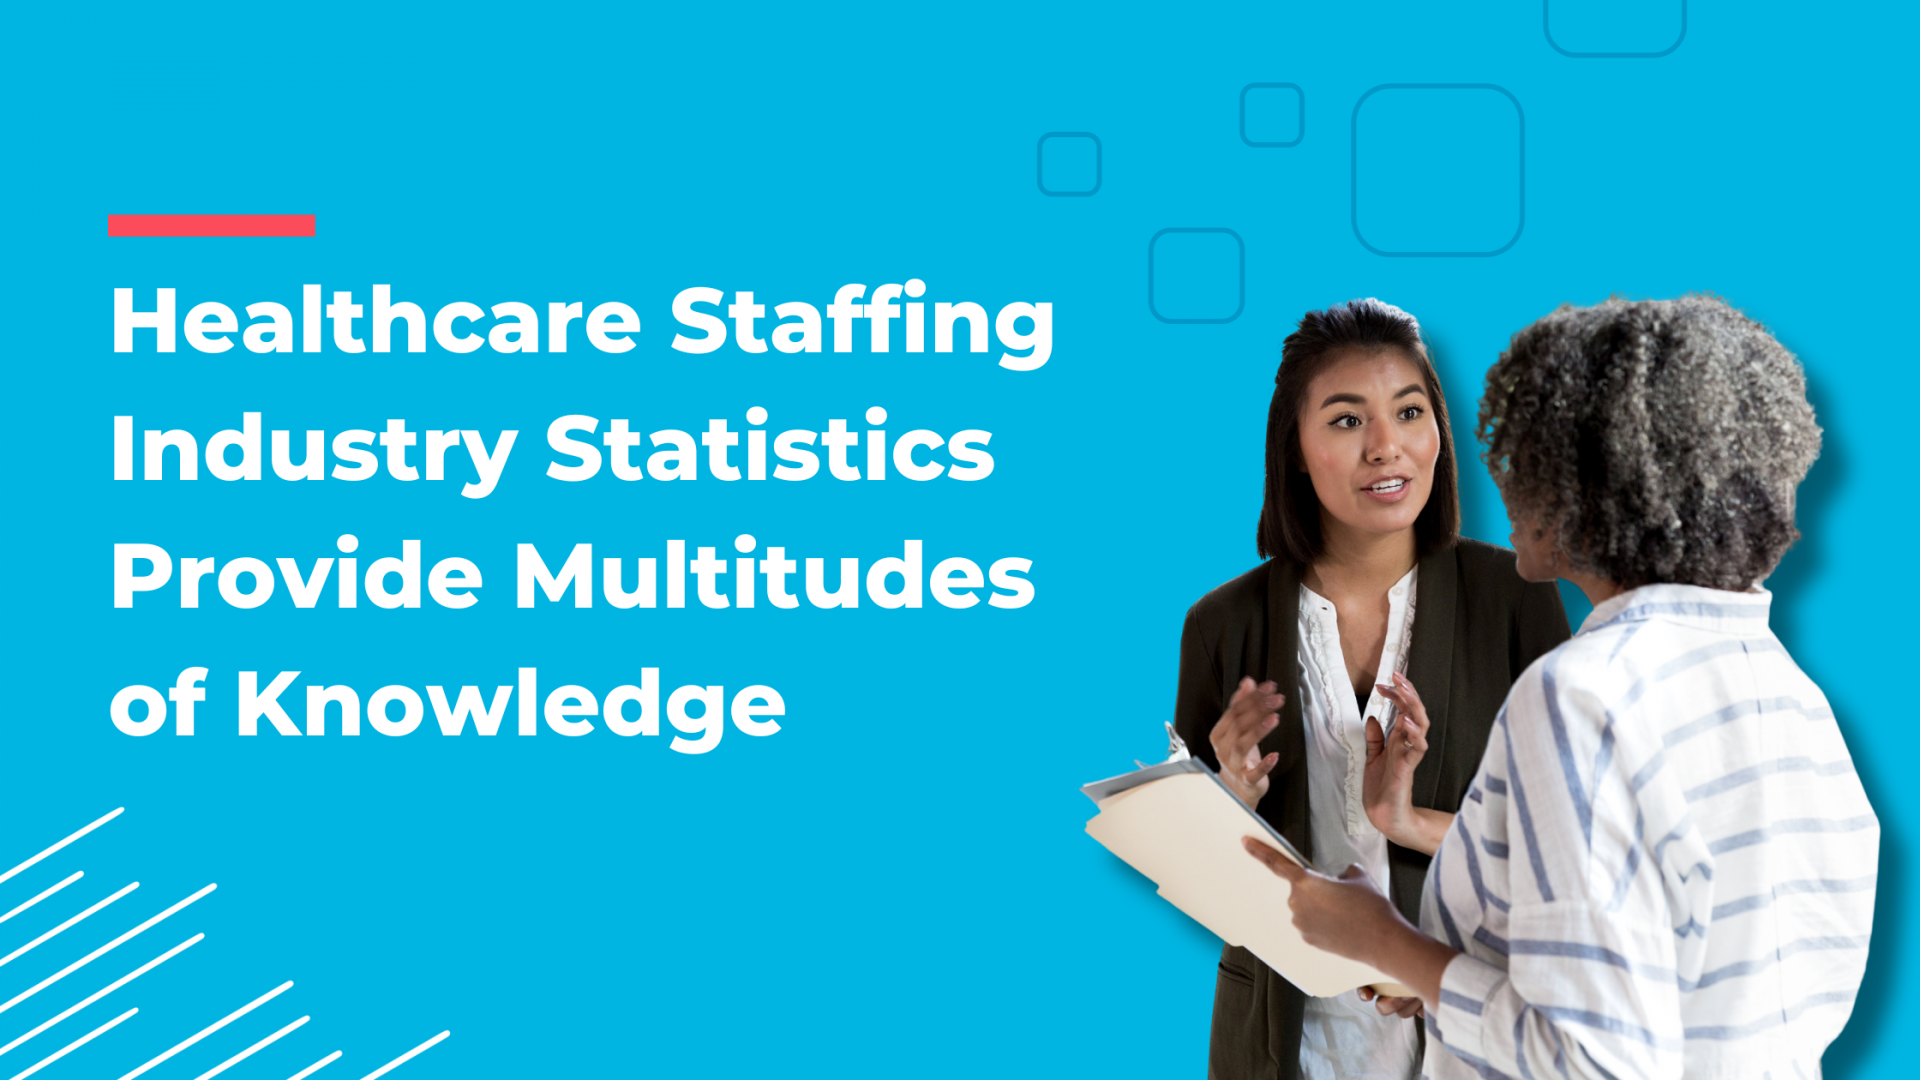 Healthcare Staffing Industry Statistics Provide Multitudes of Knowledge